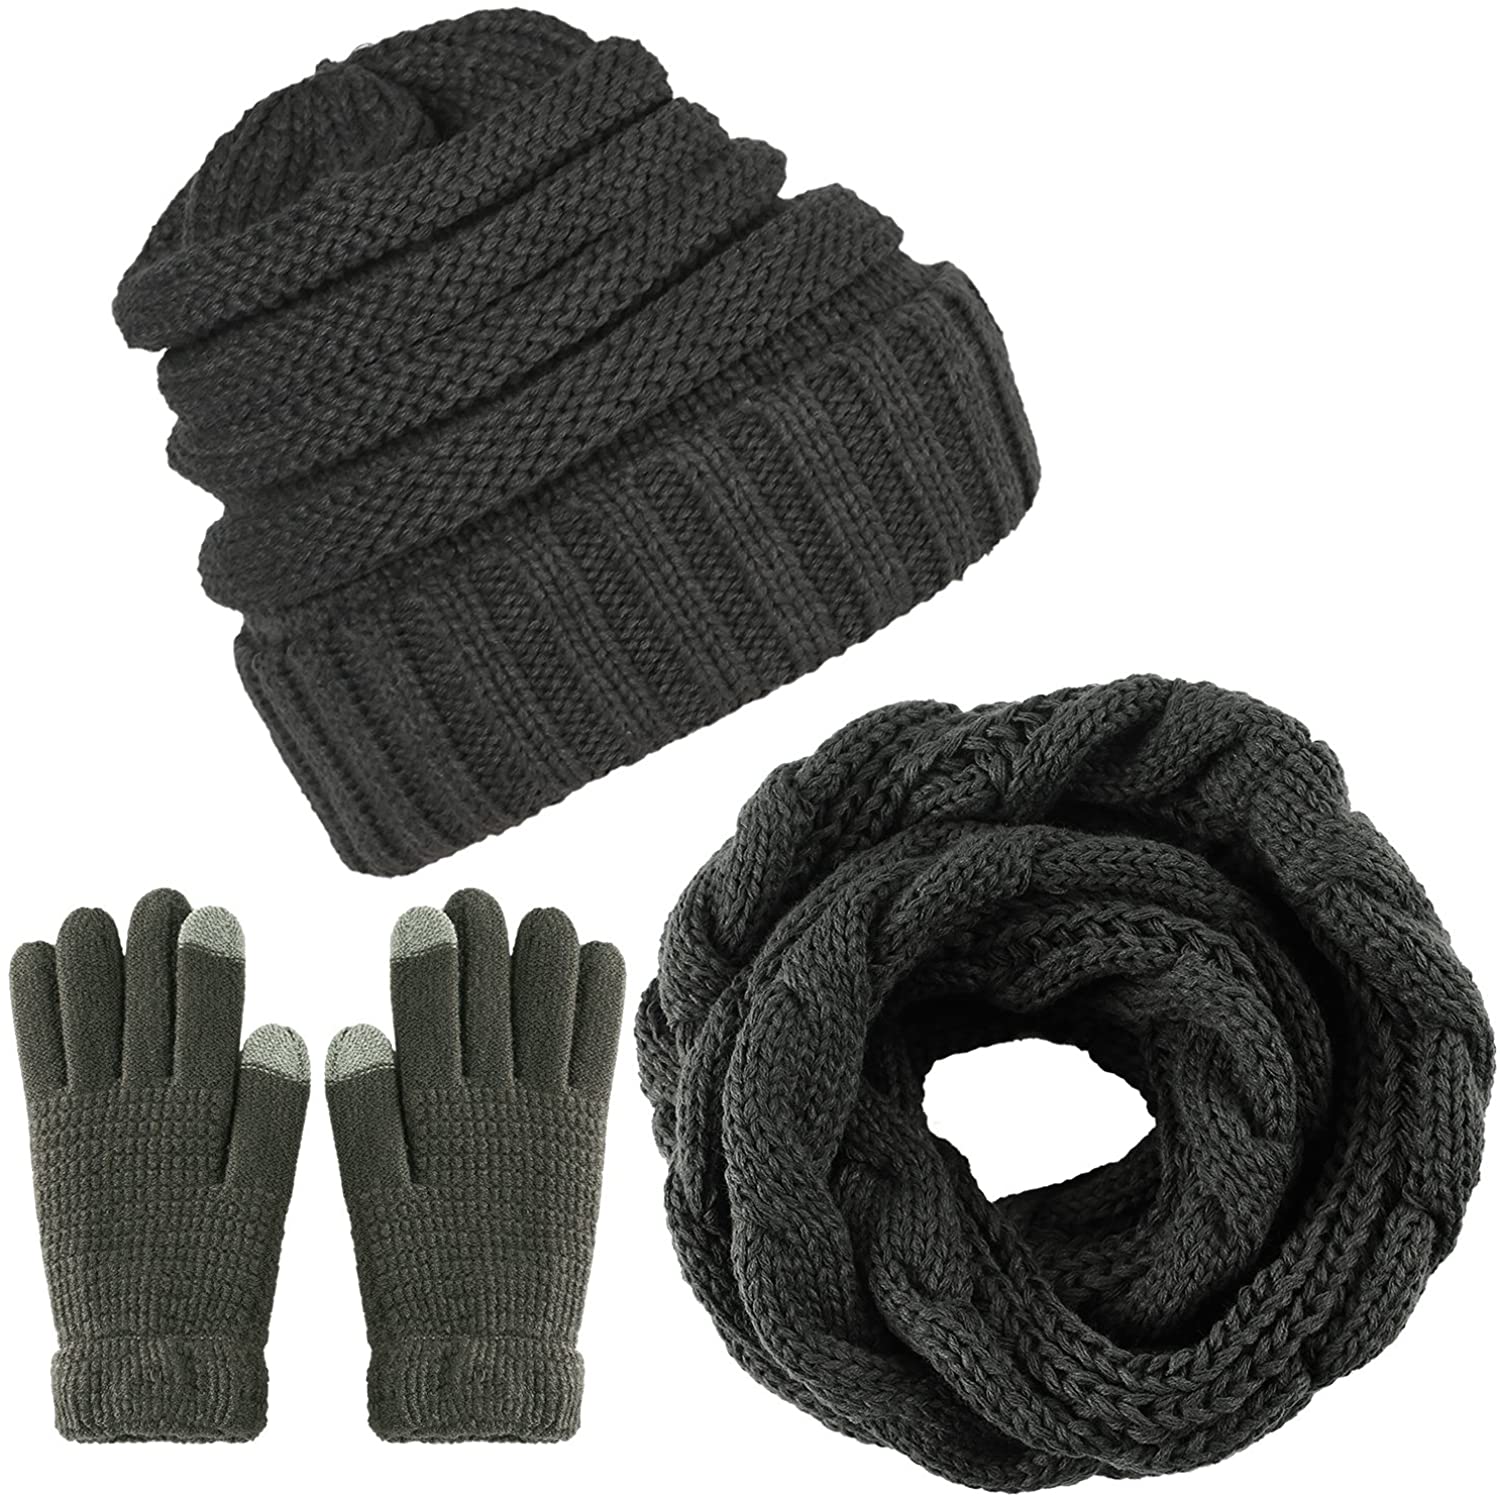 Aneco Winter Warm Sets Buffalo Plaid Scarf Knitted Beanie Hat Gloves Earloop Warm Cover for Men and Women 